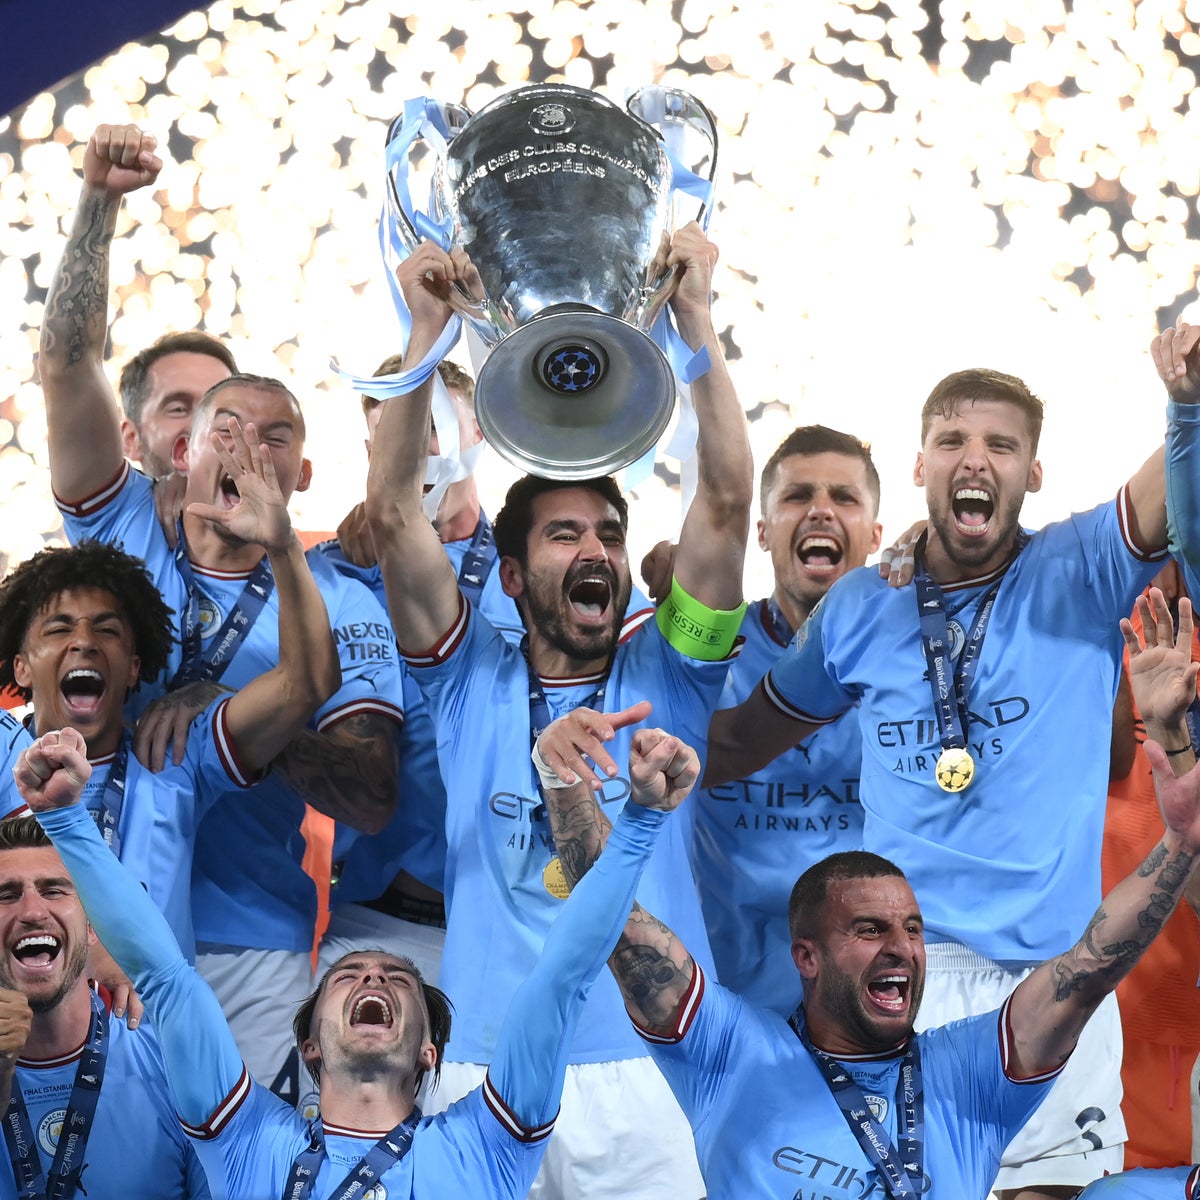 Champions League bracket 2023: Path to final for Man City and Inter Milan